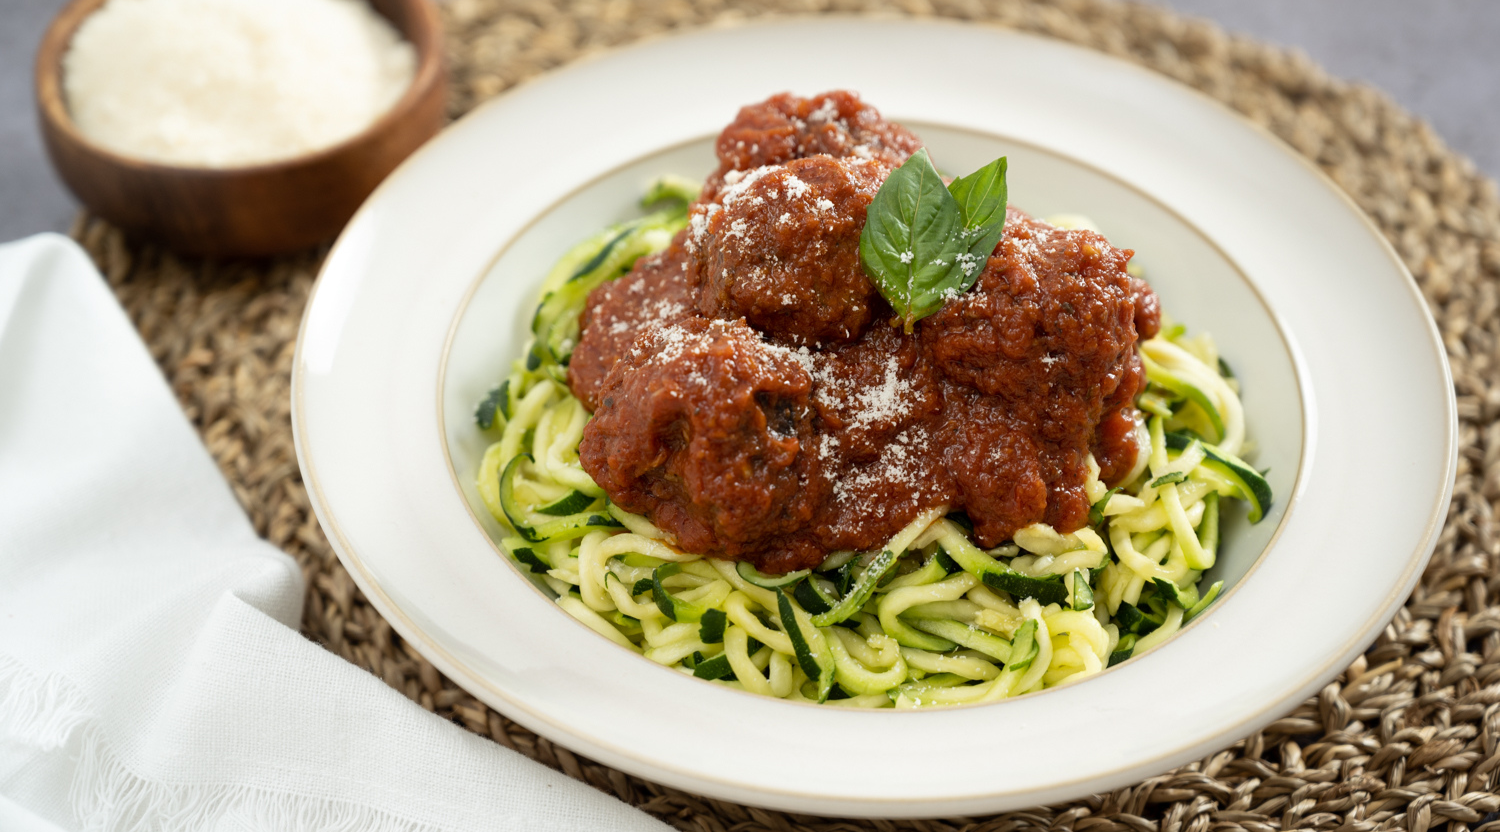 Meatballs in Tomato Sauce with Zucchini Noodles